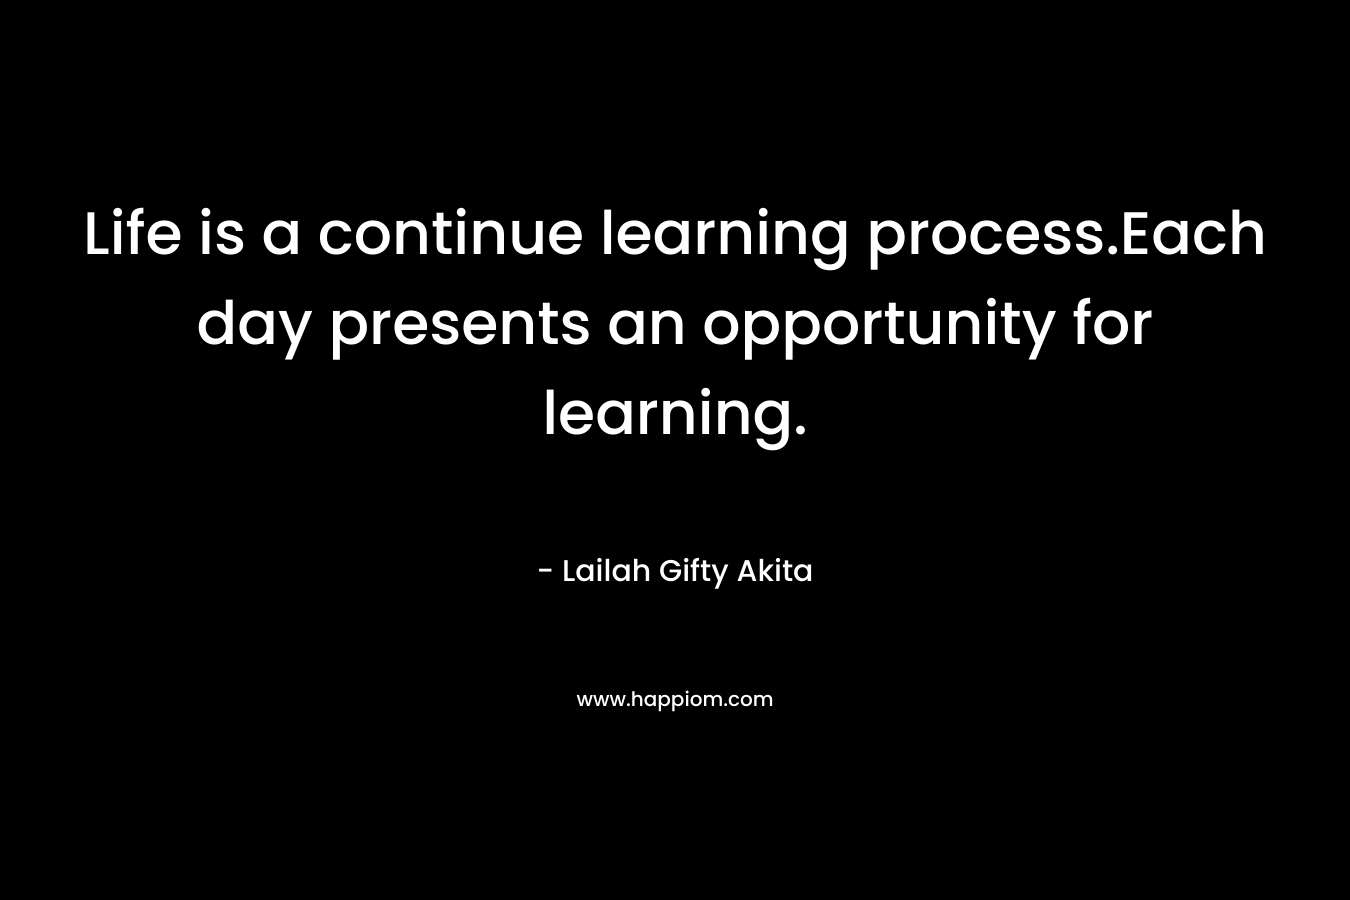 Life is a continue learning process.Each day presents an opportunity for learning.